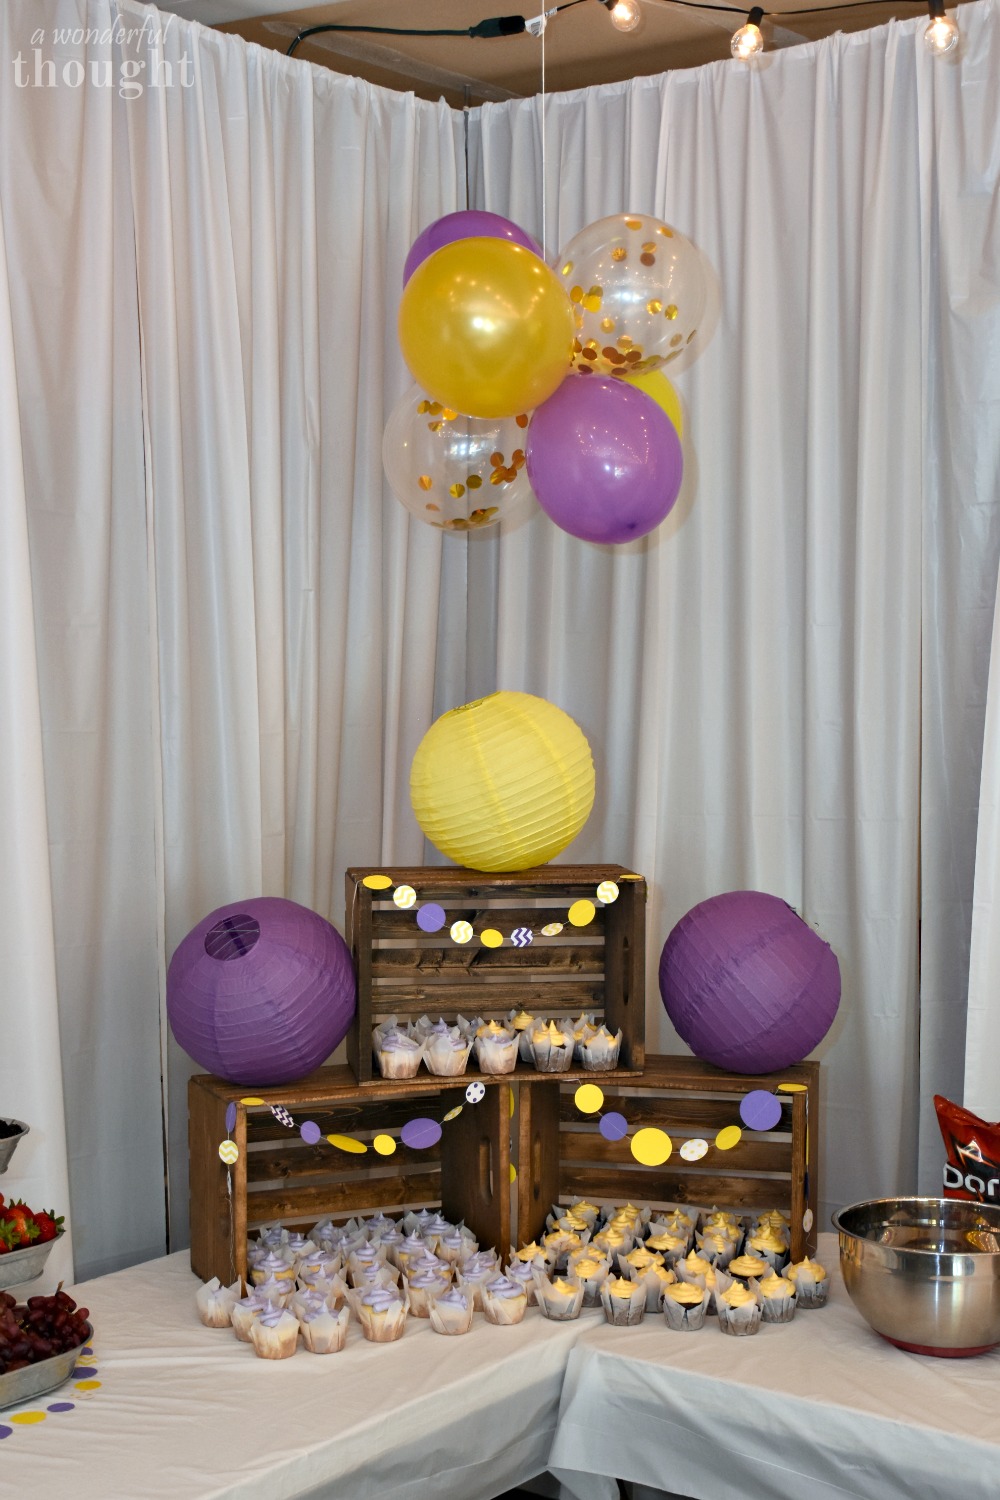 Graduation Party Ideas | Garage Party #graduationparty #graduationdecor #graduationfood #partyideas #partydecor #awonderfulthought #cupcakedisplay